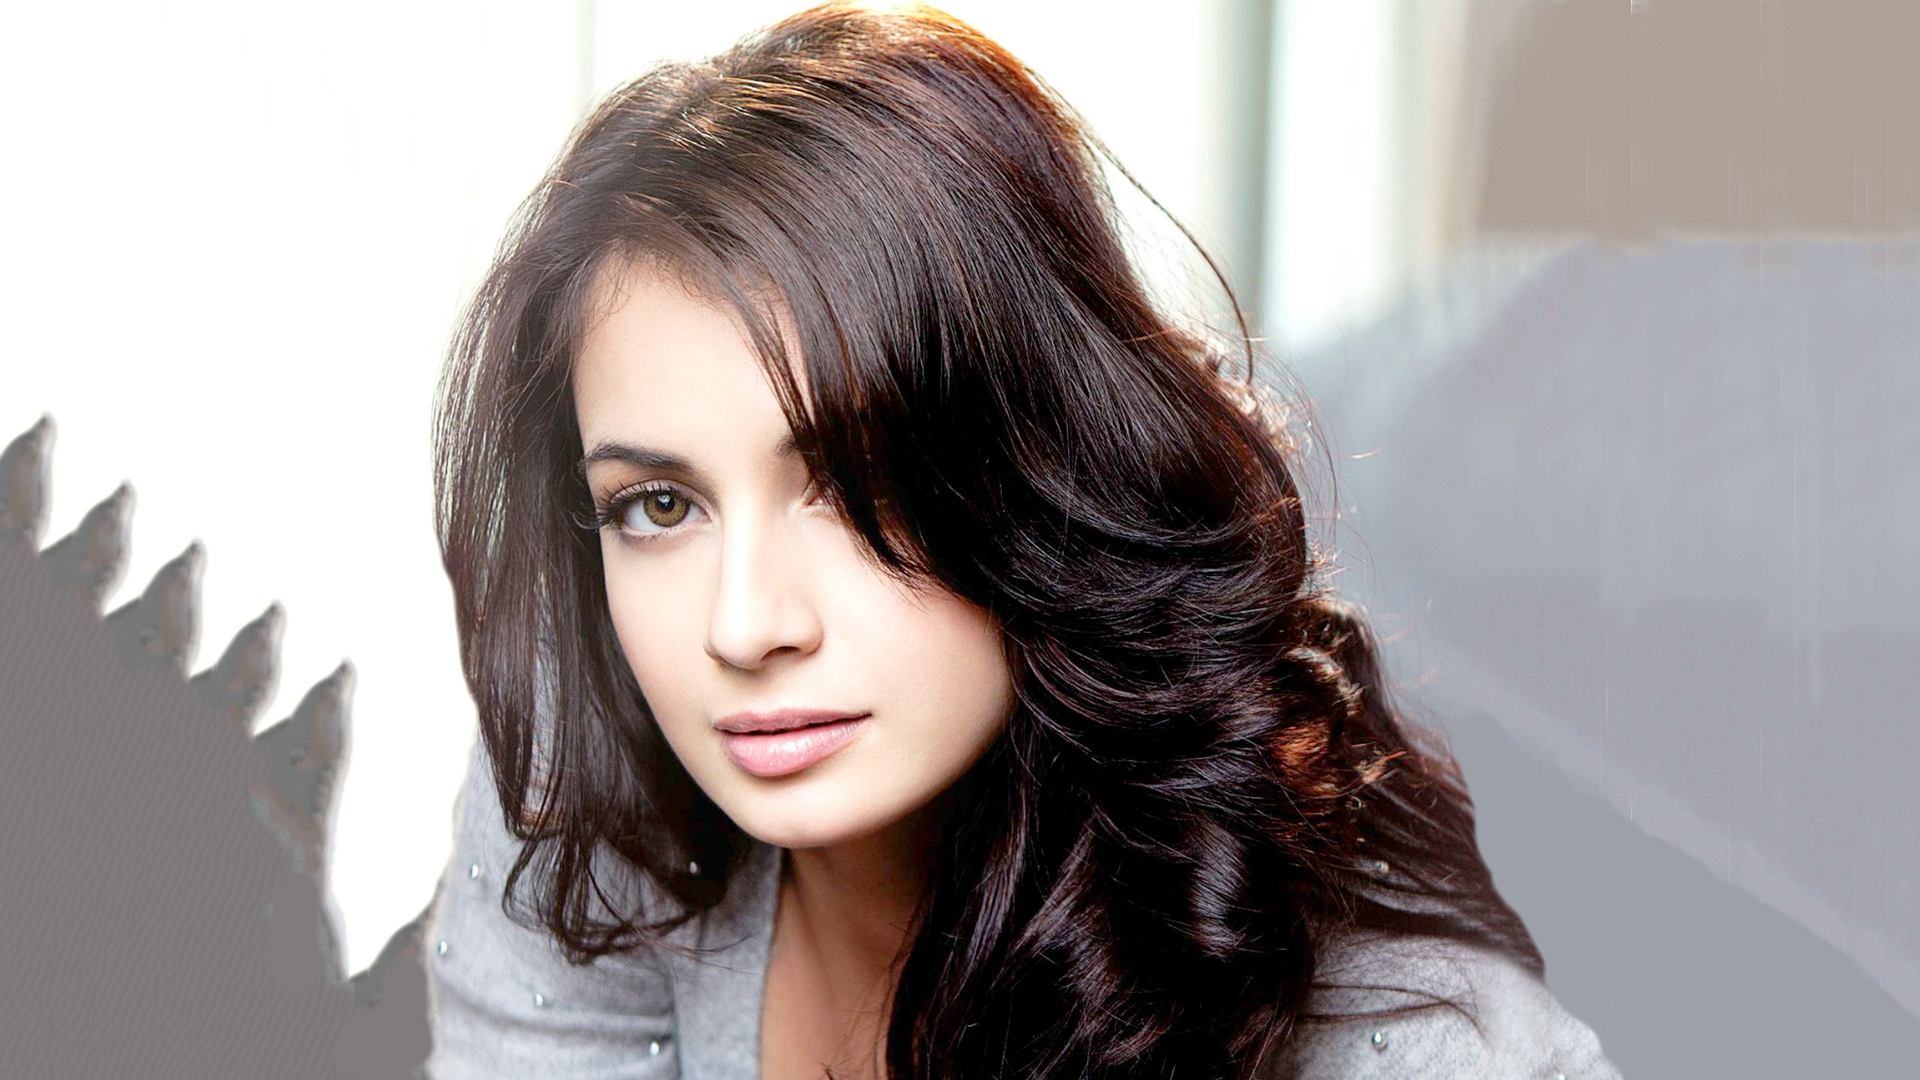 Amazing Dia Mirza Eye Look Mobile Hd Download Free Background Wallpaper